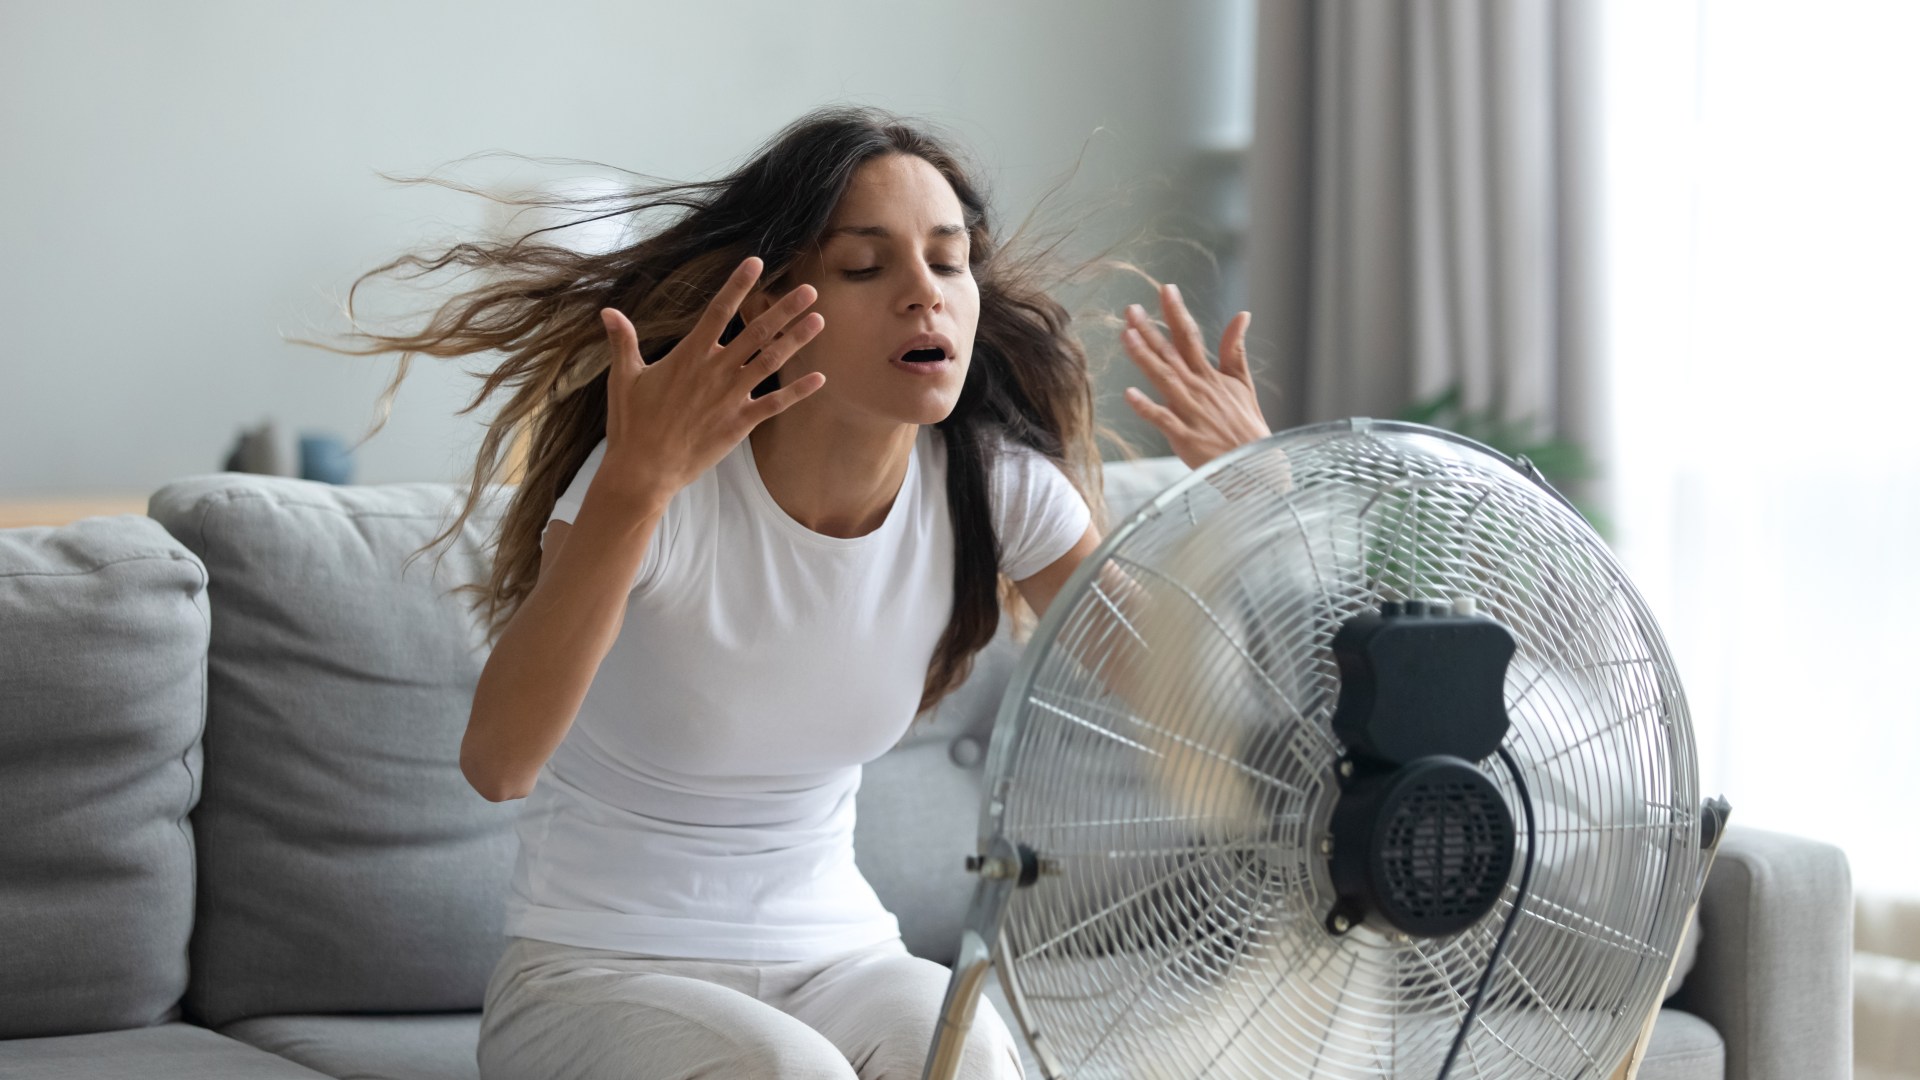 Brits warned of six dangerous and common fan mistakes as summer finally returns with sizzling temperatures next week [Video]